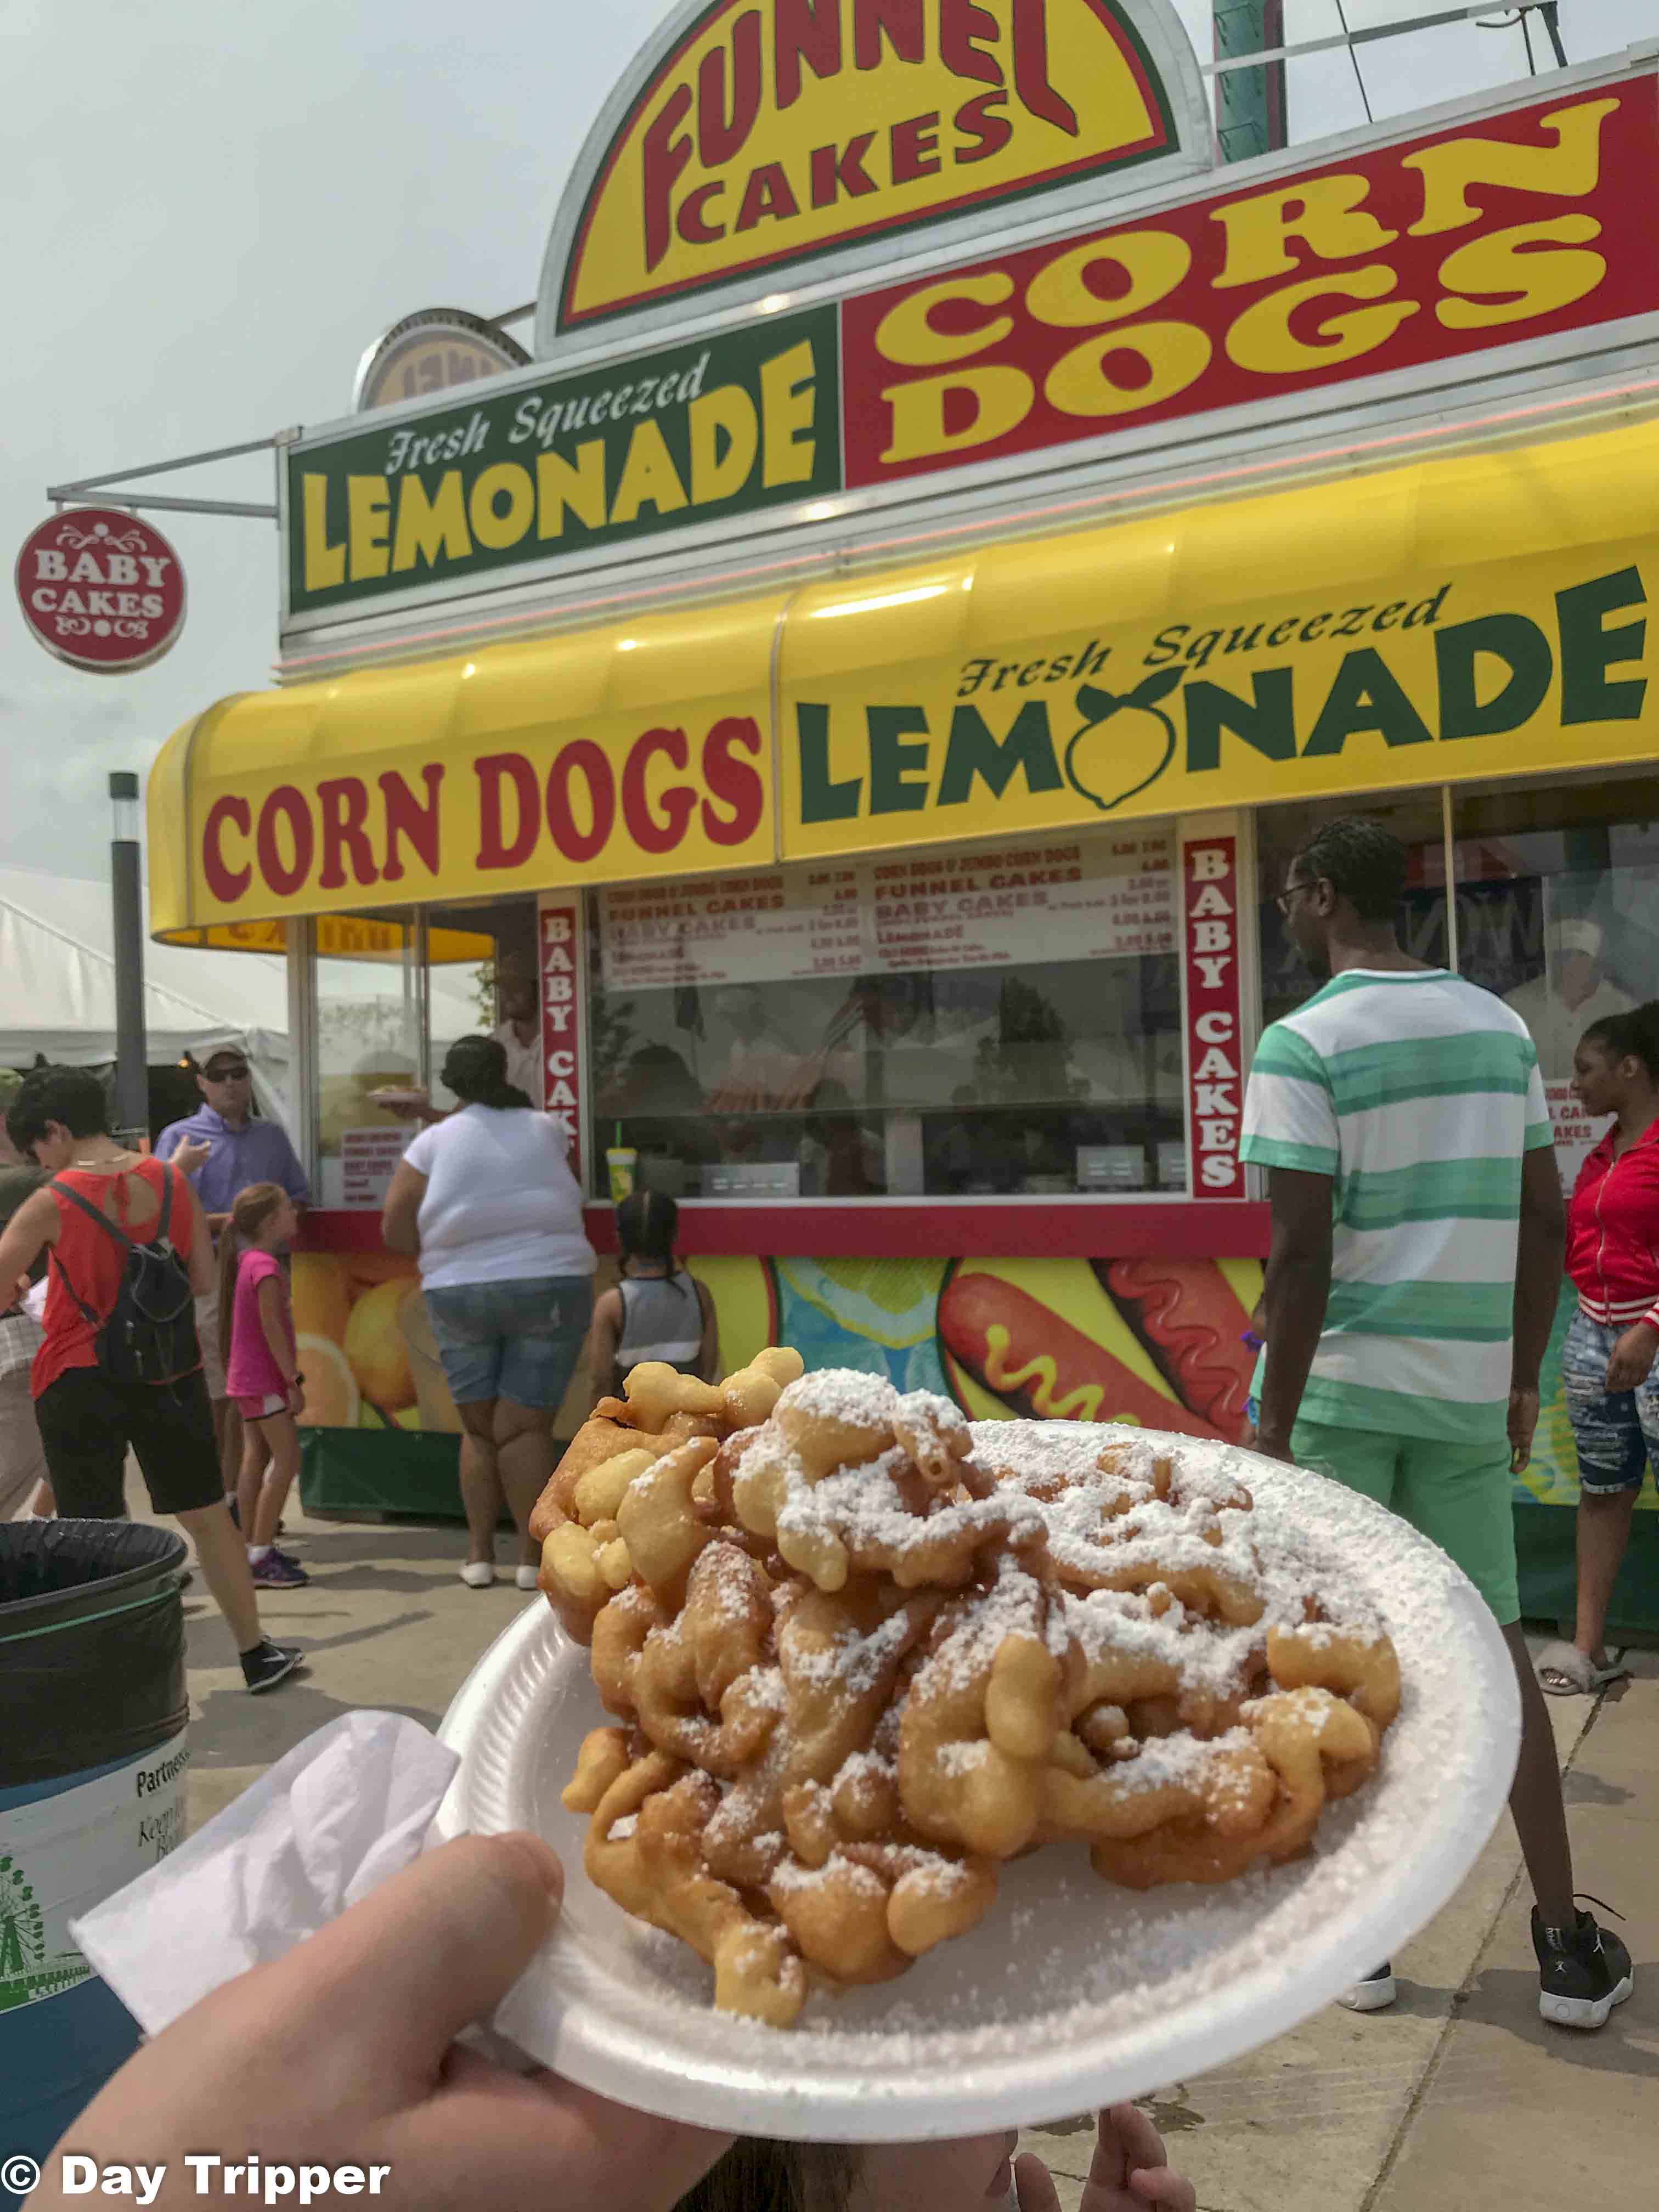 Enjoying some funnel cakes at the Iowa State Fair